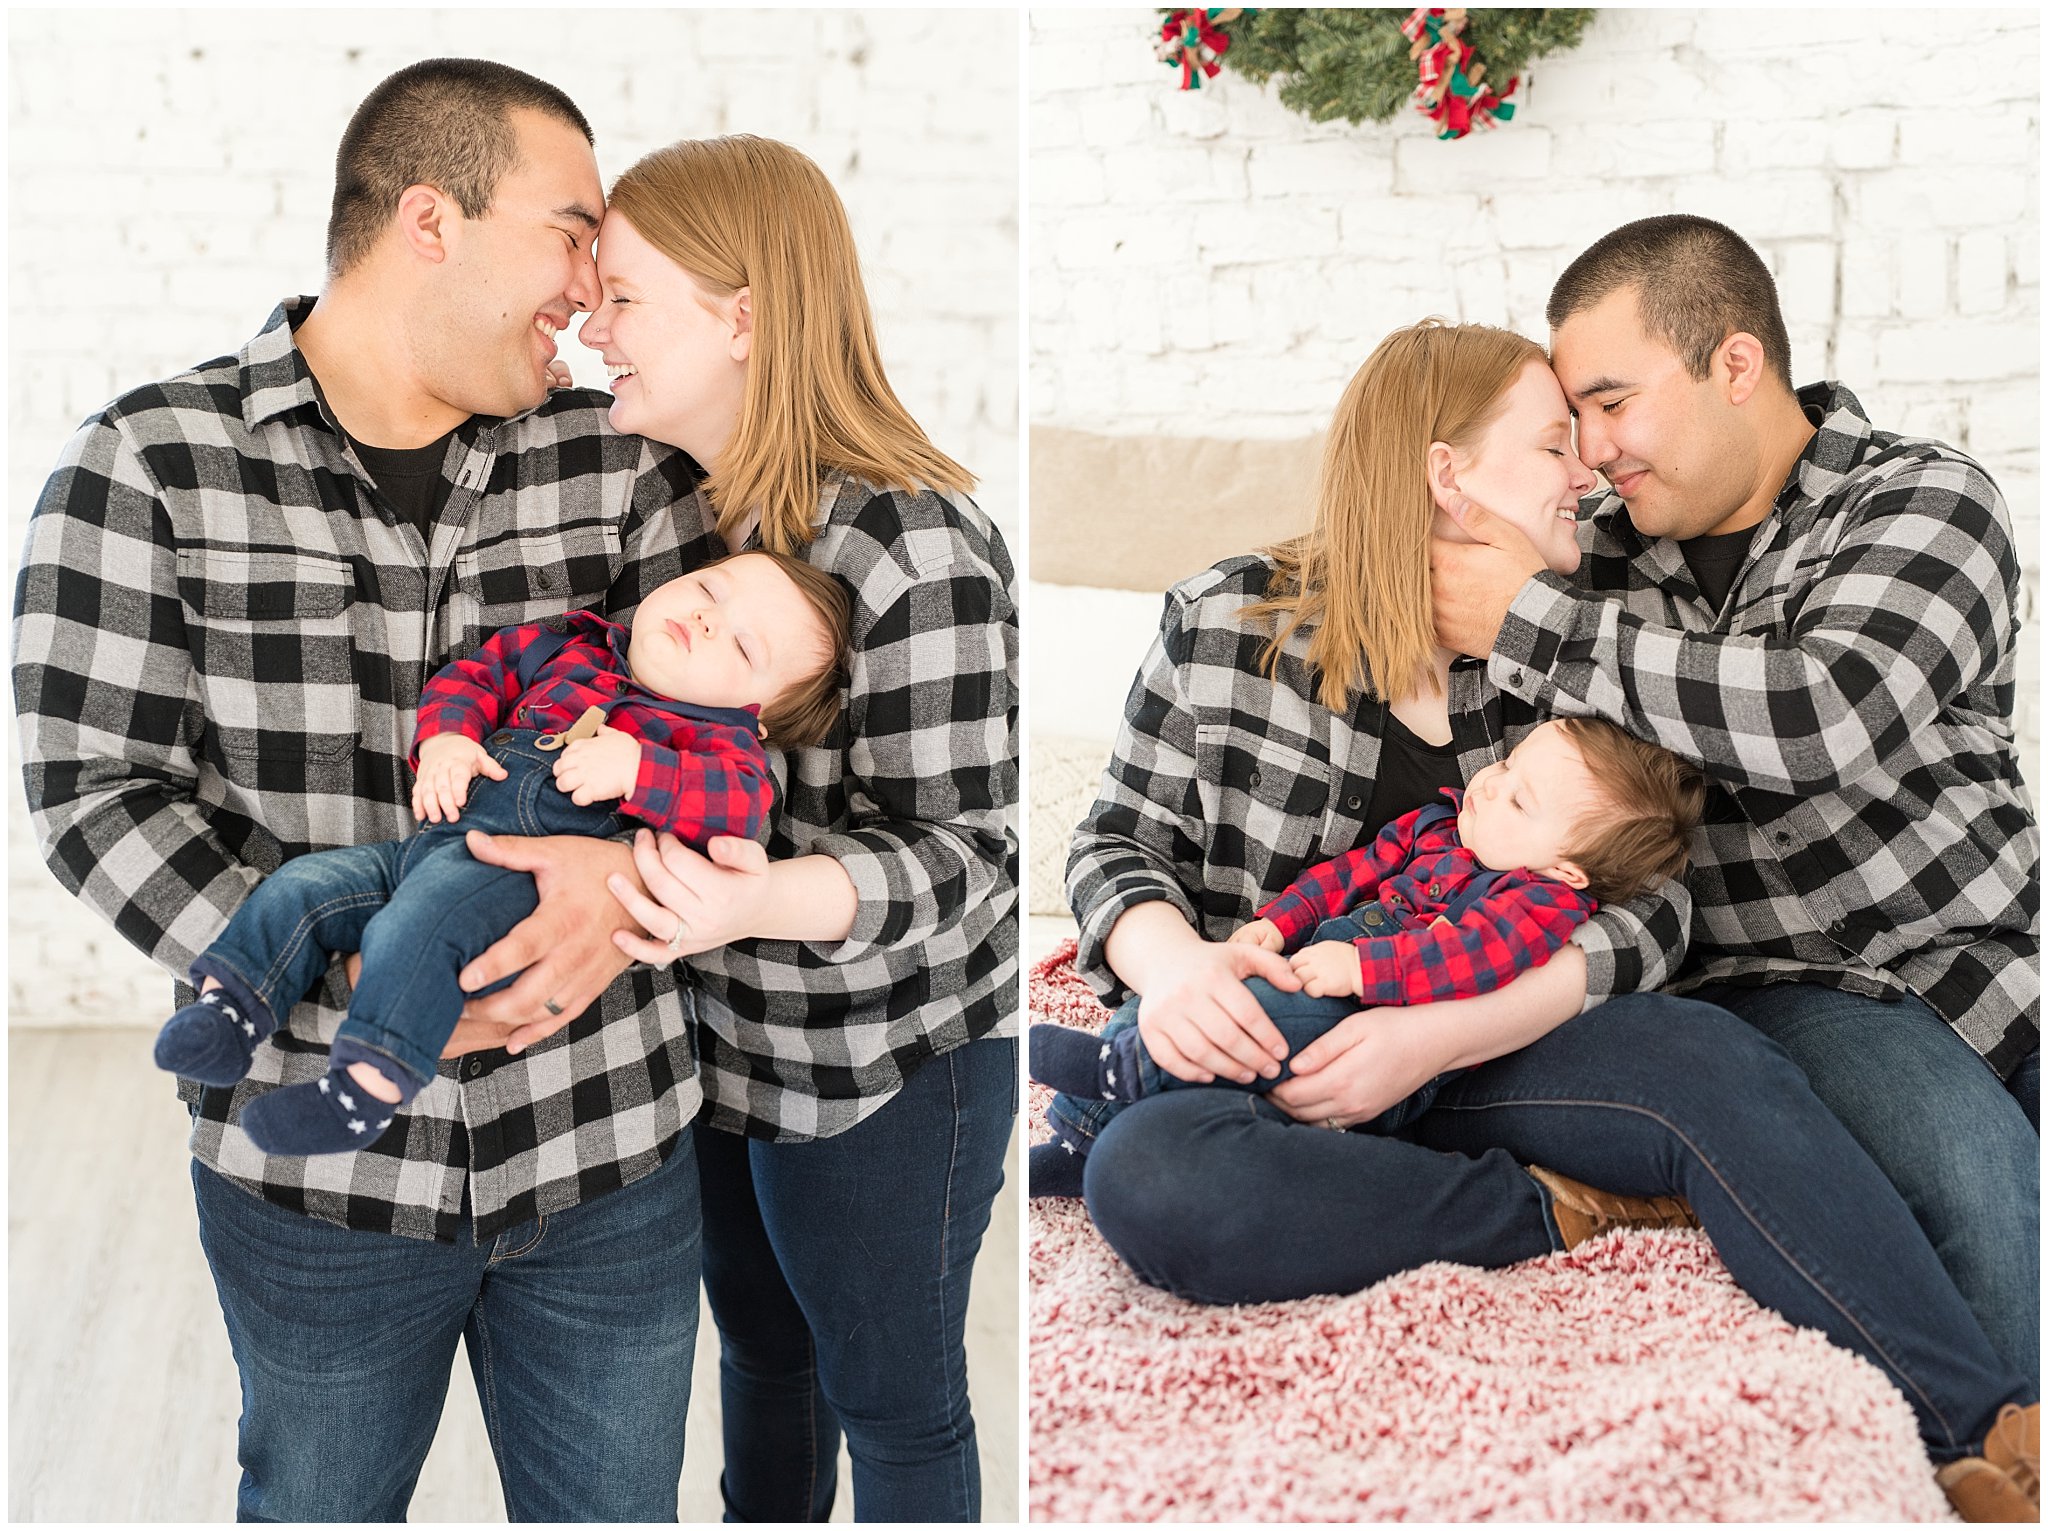 Parents snuggling baby boy | Family Christmas session at the 5th floor | Utah Photographers | Jessie and Dallin Photography